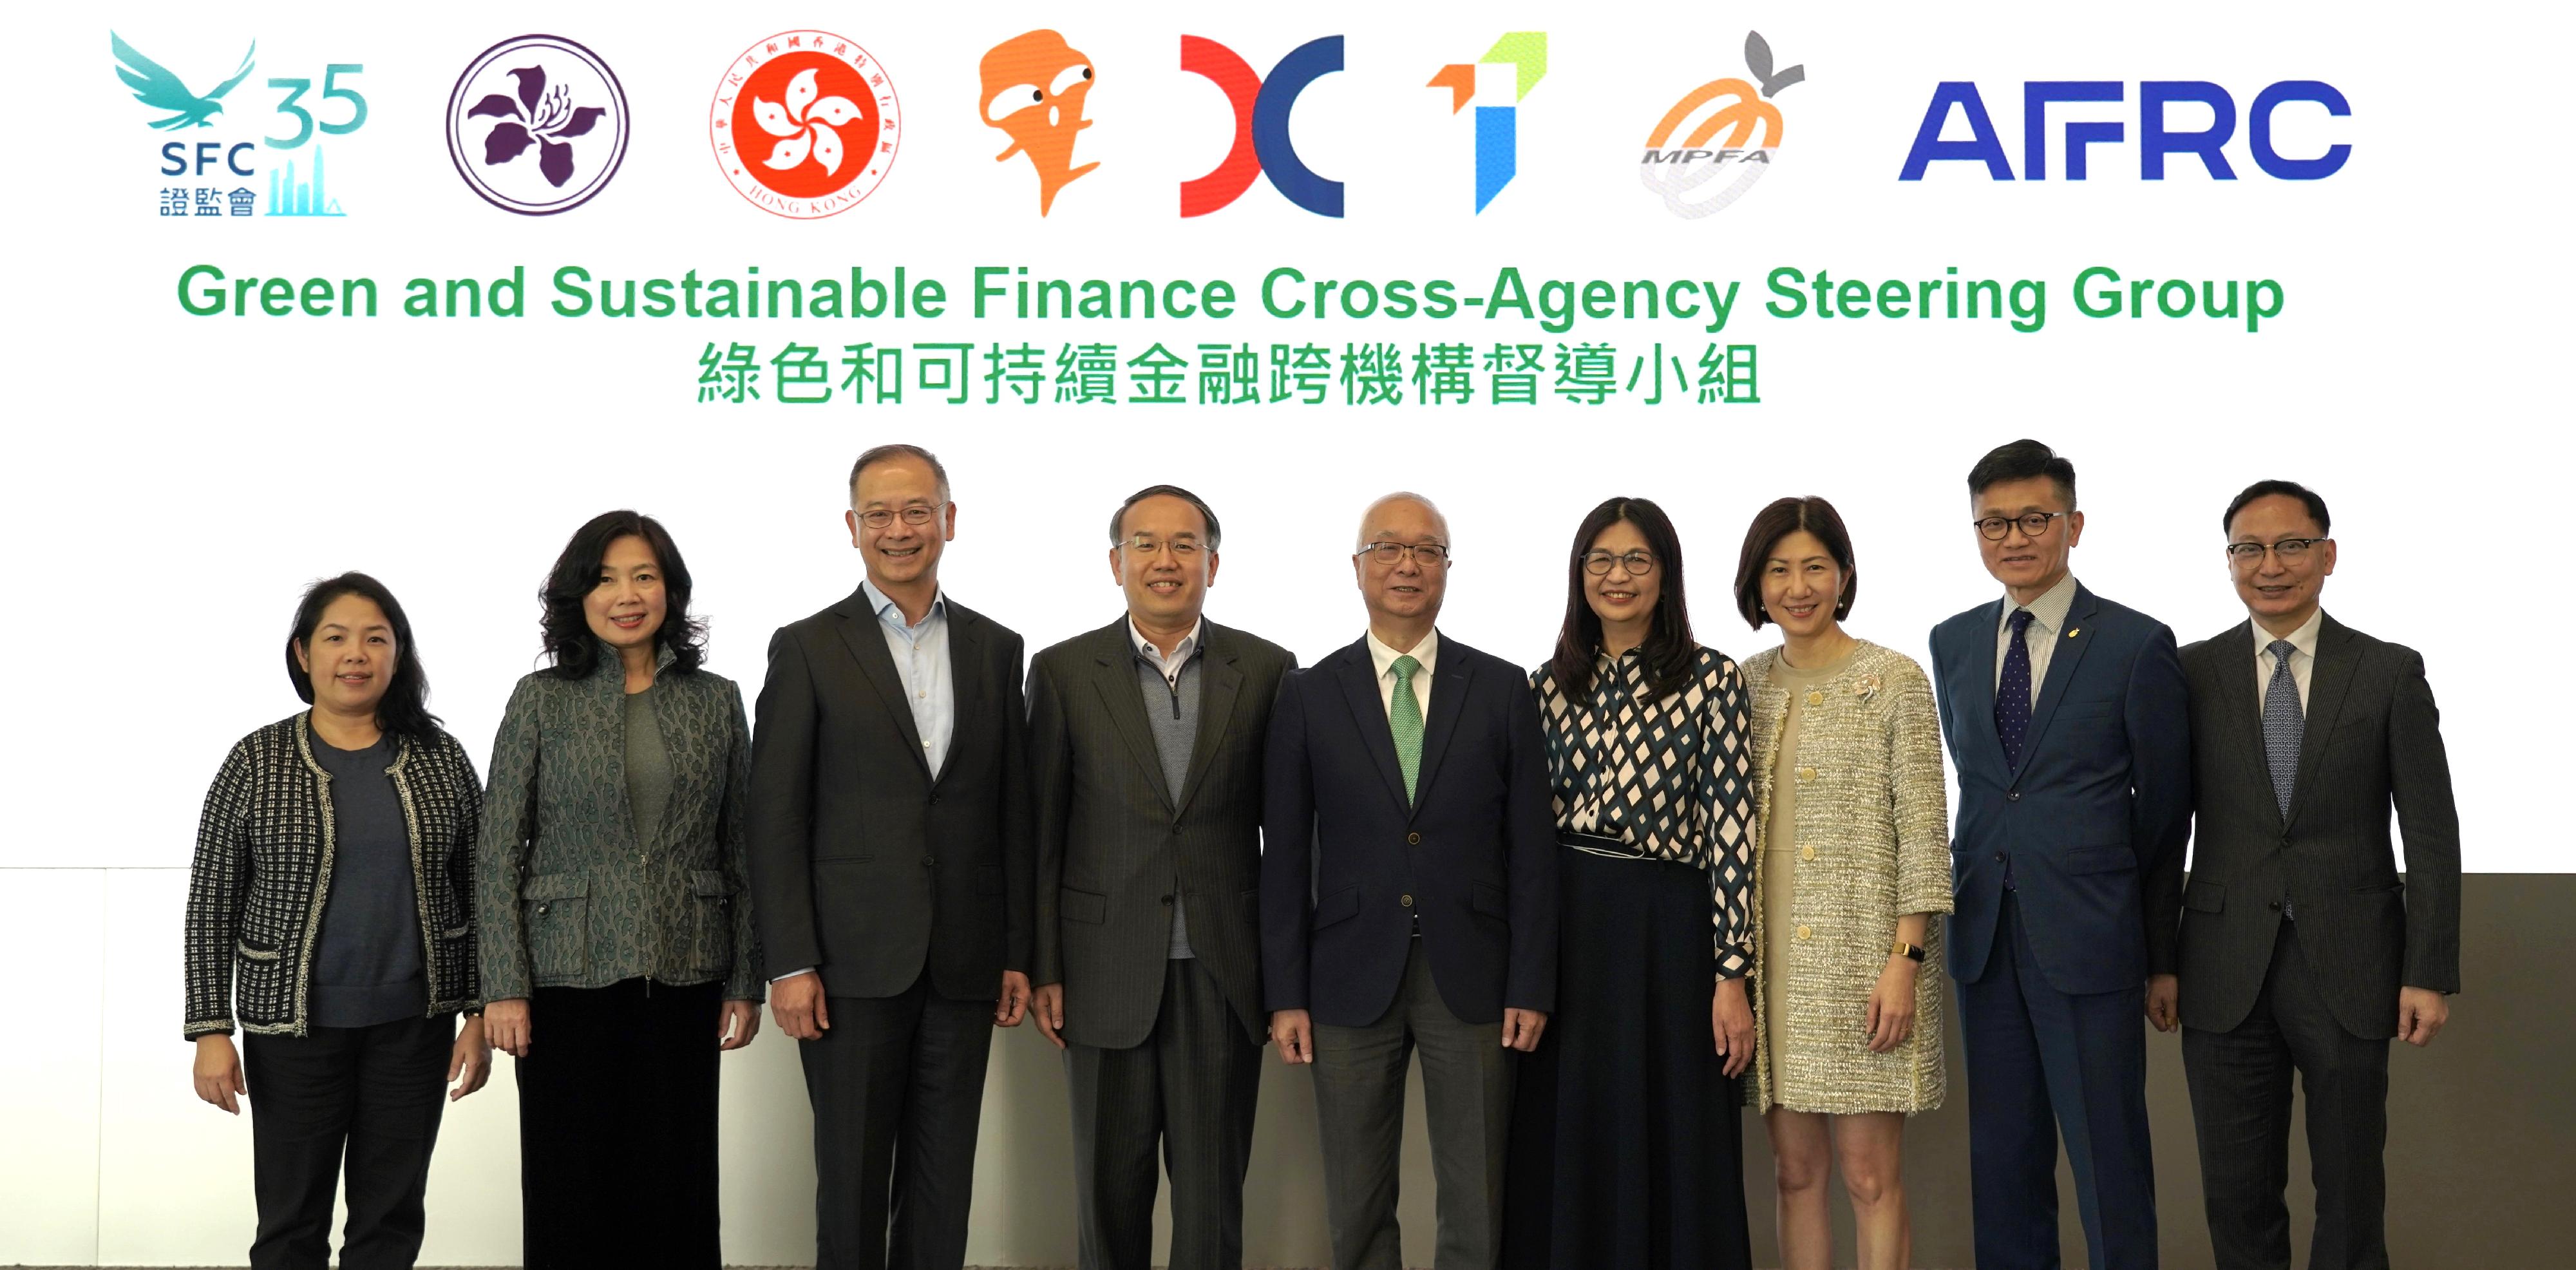 The meeting of the Green and Sustainable Finance Cross-Agency Steering Group is attended by (from left): the Acting Chief Executive Officer of the Accounting and Financial Reporting Council, Ms Janey Lai; the Permanent Secretary for Financial Services and the Treasury (Financial Services), Ms Salina Yan; the Chief Executive of the Hong Kong Monetary Authority, Mr Eddie Yue; the Secretary for Financial Services and the Treasury, Mr Christopher Hui; the Secretary for Environment and Ecology, Mr Tse Chin-wan; the Chief Executive Officer of the Securities and Futures Commission, Ms Julia Leung; Co-Chief Operating Officer of the Hong Kong Exchanges and Clearing Limited, Ms Bonnie Chan; Managing Director of the Mandatory Provident Fund Schemes Authority, Mr Cheng Yan-chee; and the Chief Executive Officer of the Insurance Authority, Mr Clement Cheung.